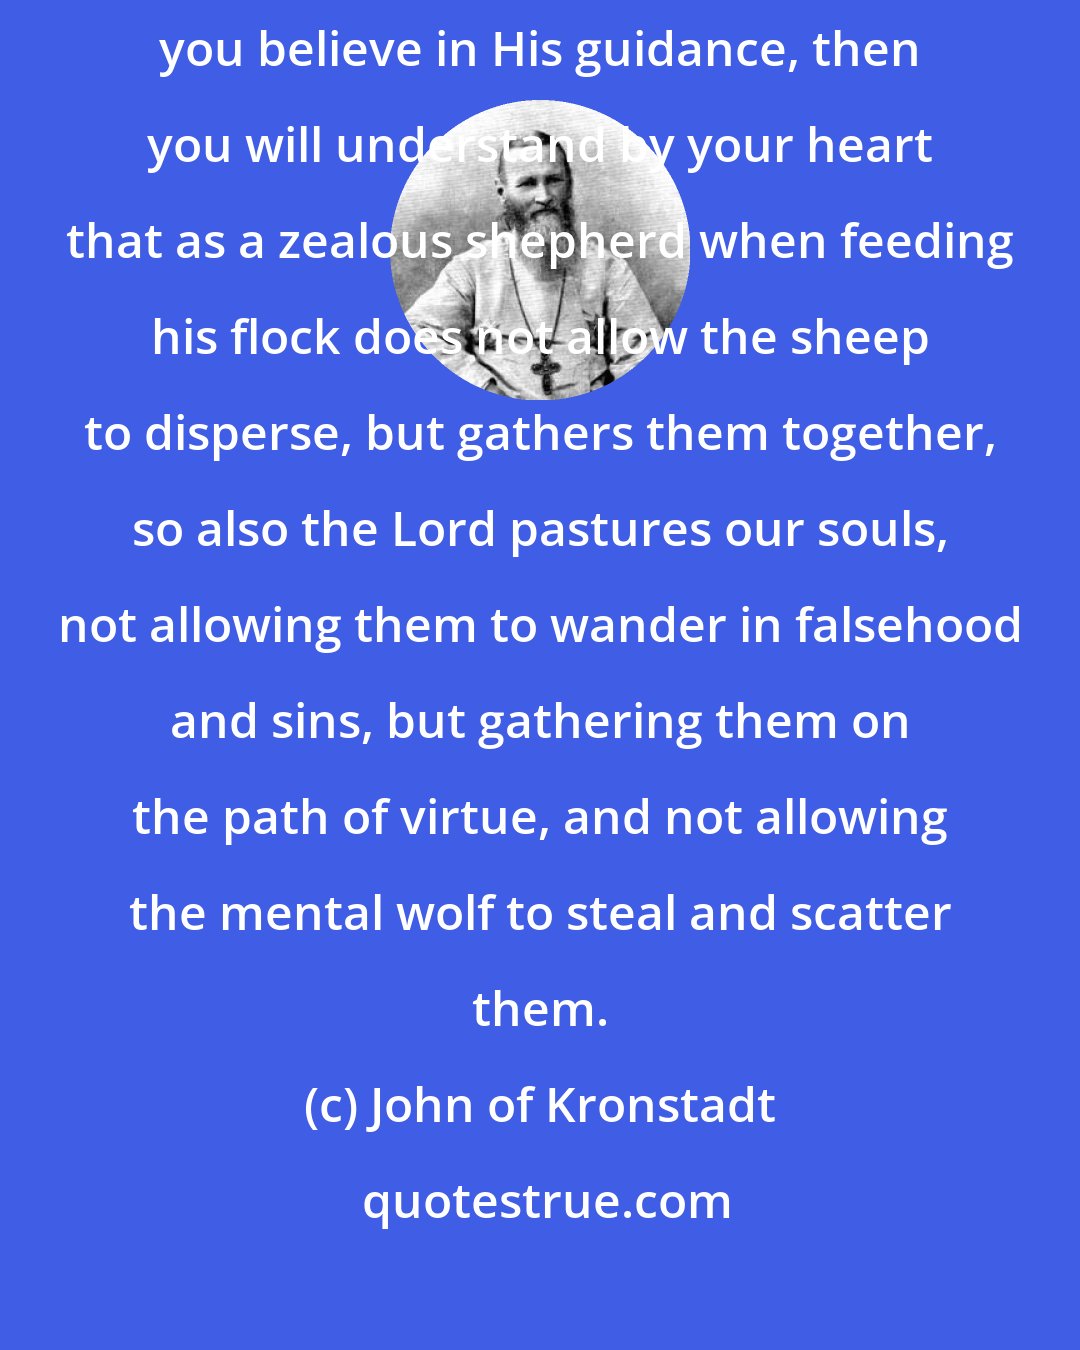 John of Kronstadt: The Lord called Himself and is the 'good Shepherd' (Jn. 10:11). If you believe in His guidance, then you will understand by your heart that as a zealous shepherd when feeding his flock does not allow the sheep to disperse, but gathers them together, so also the Lord pastures our souls, not allowing them to wander in falsehood and sins, but gathering them on the path of virtue, and not allowing the mental wolf to steal and scatter them.